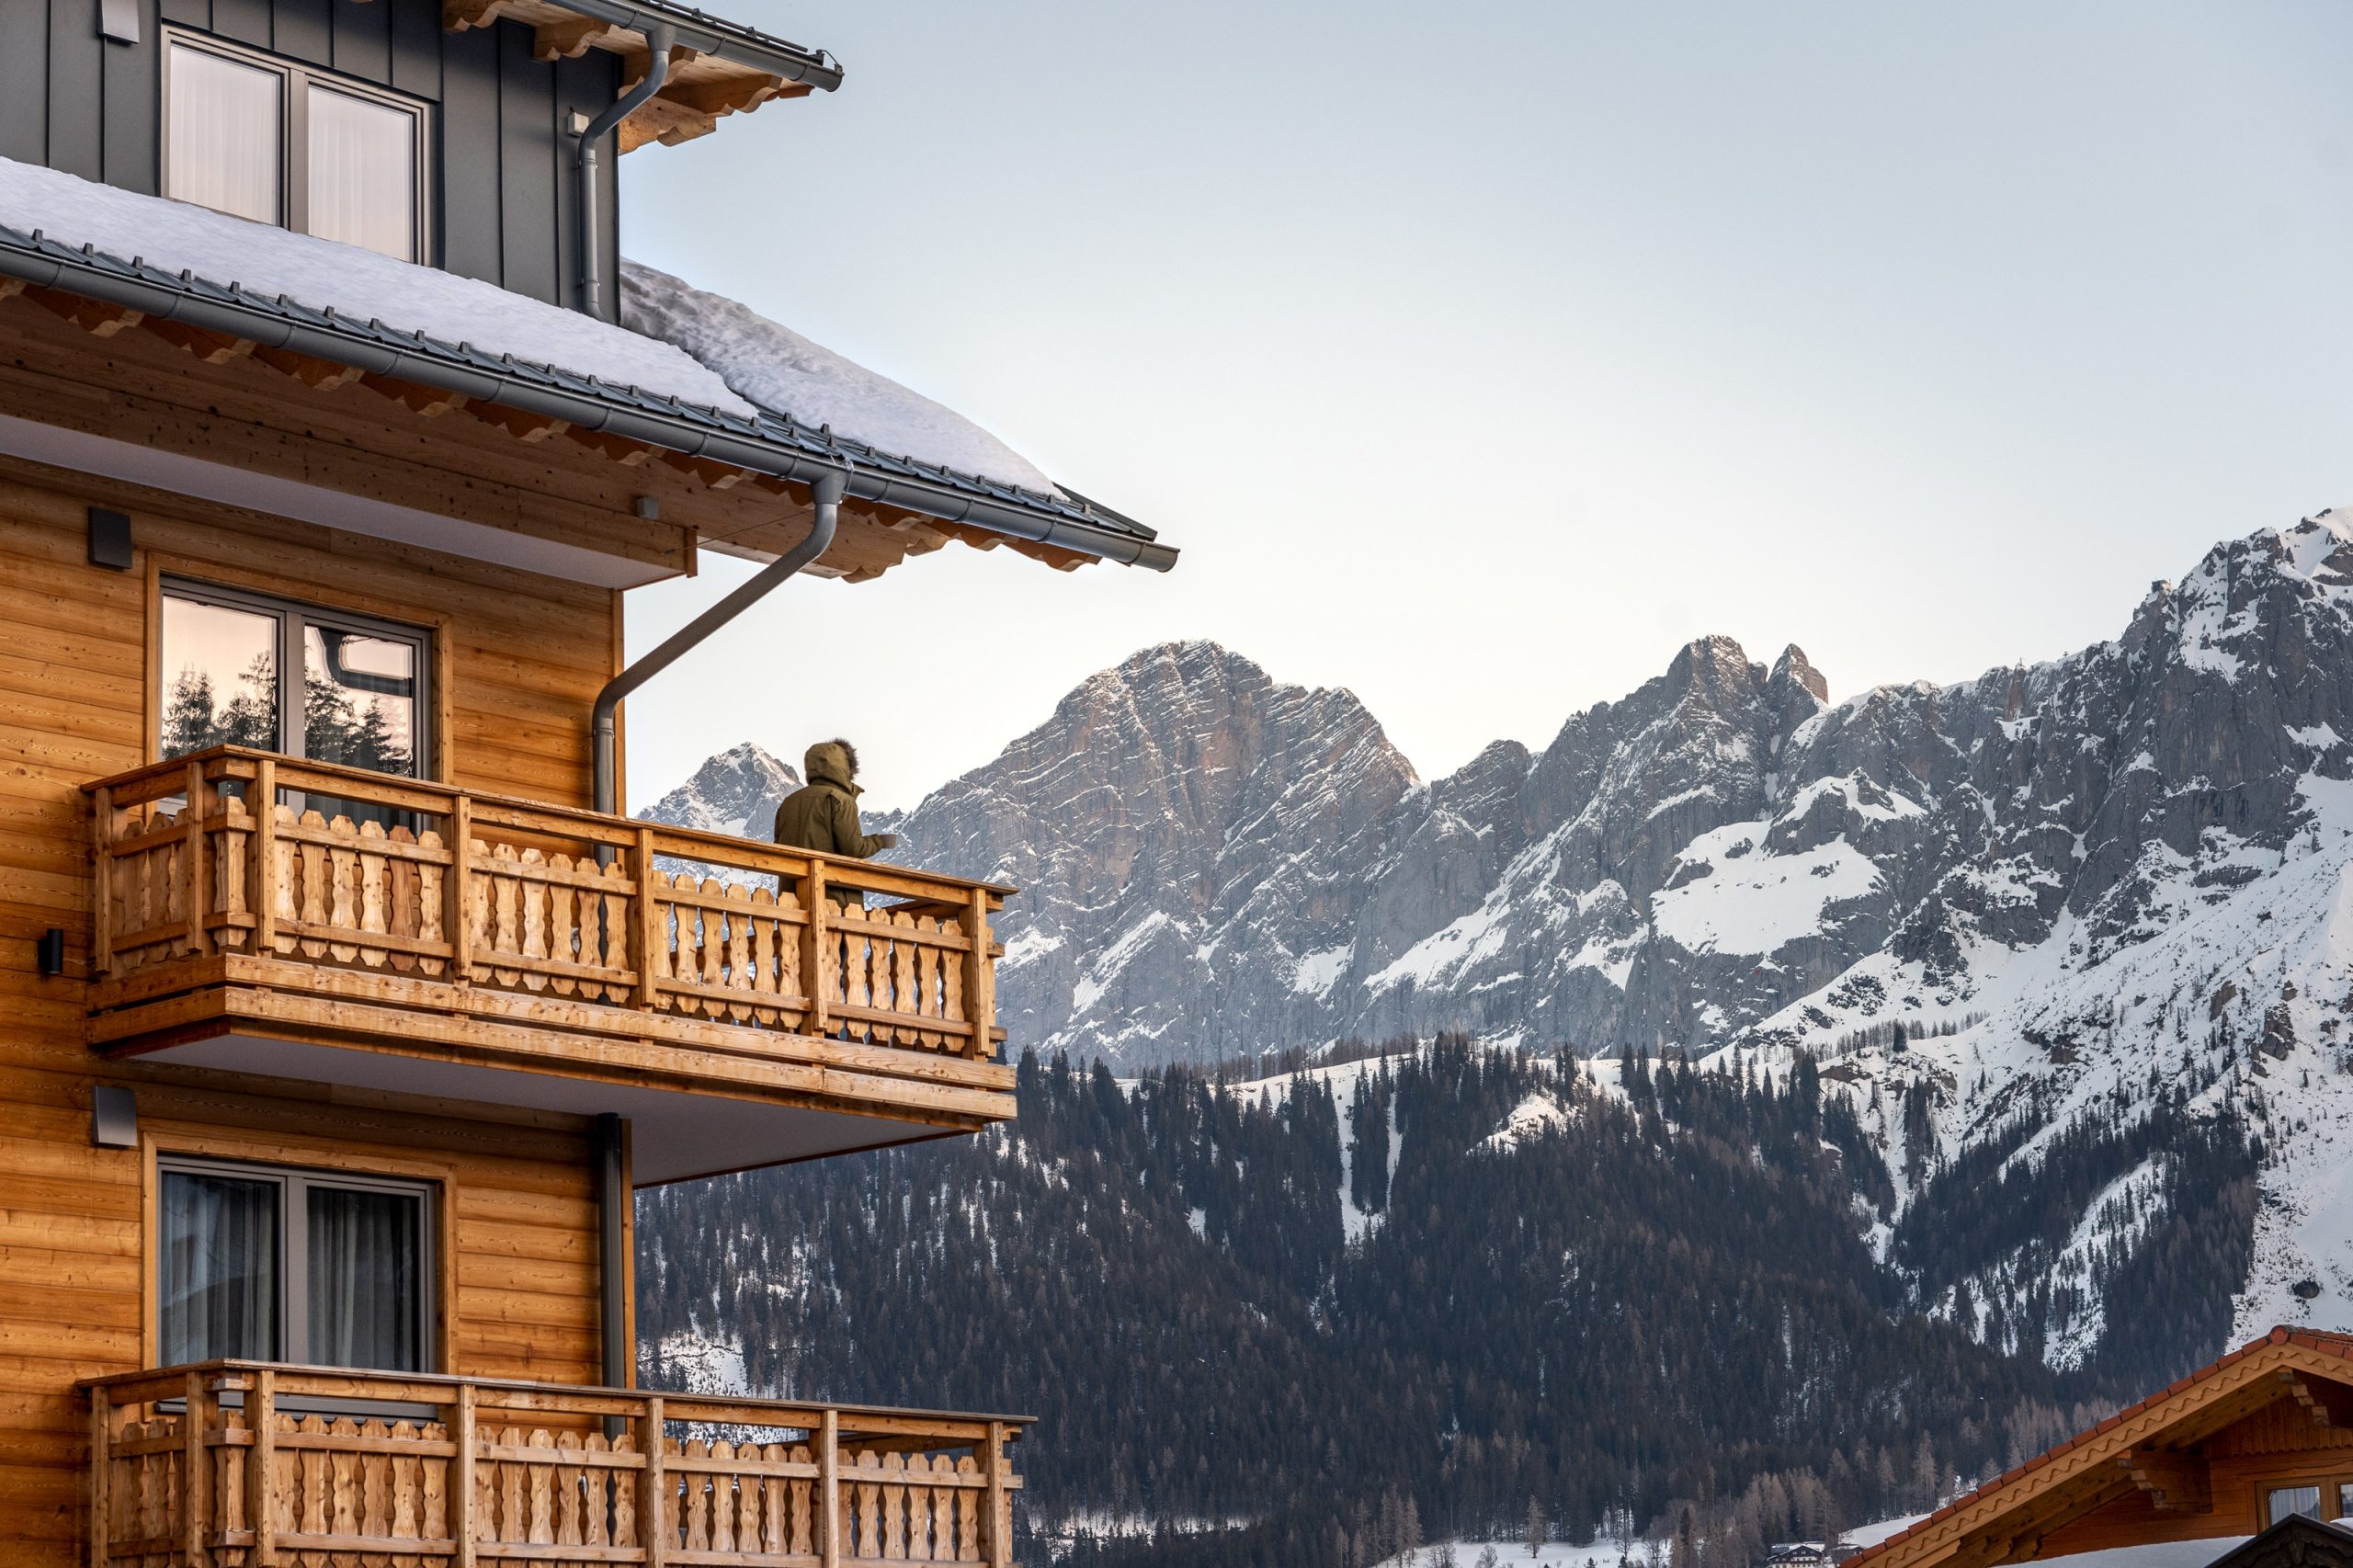 Holiday in Ramsau: A Celebration of The Best Of The Season